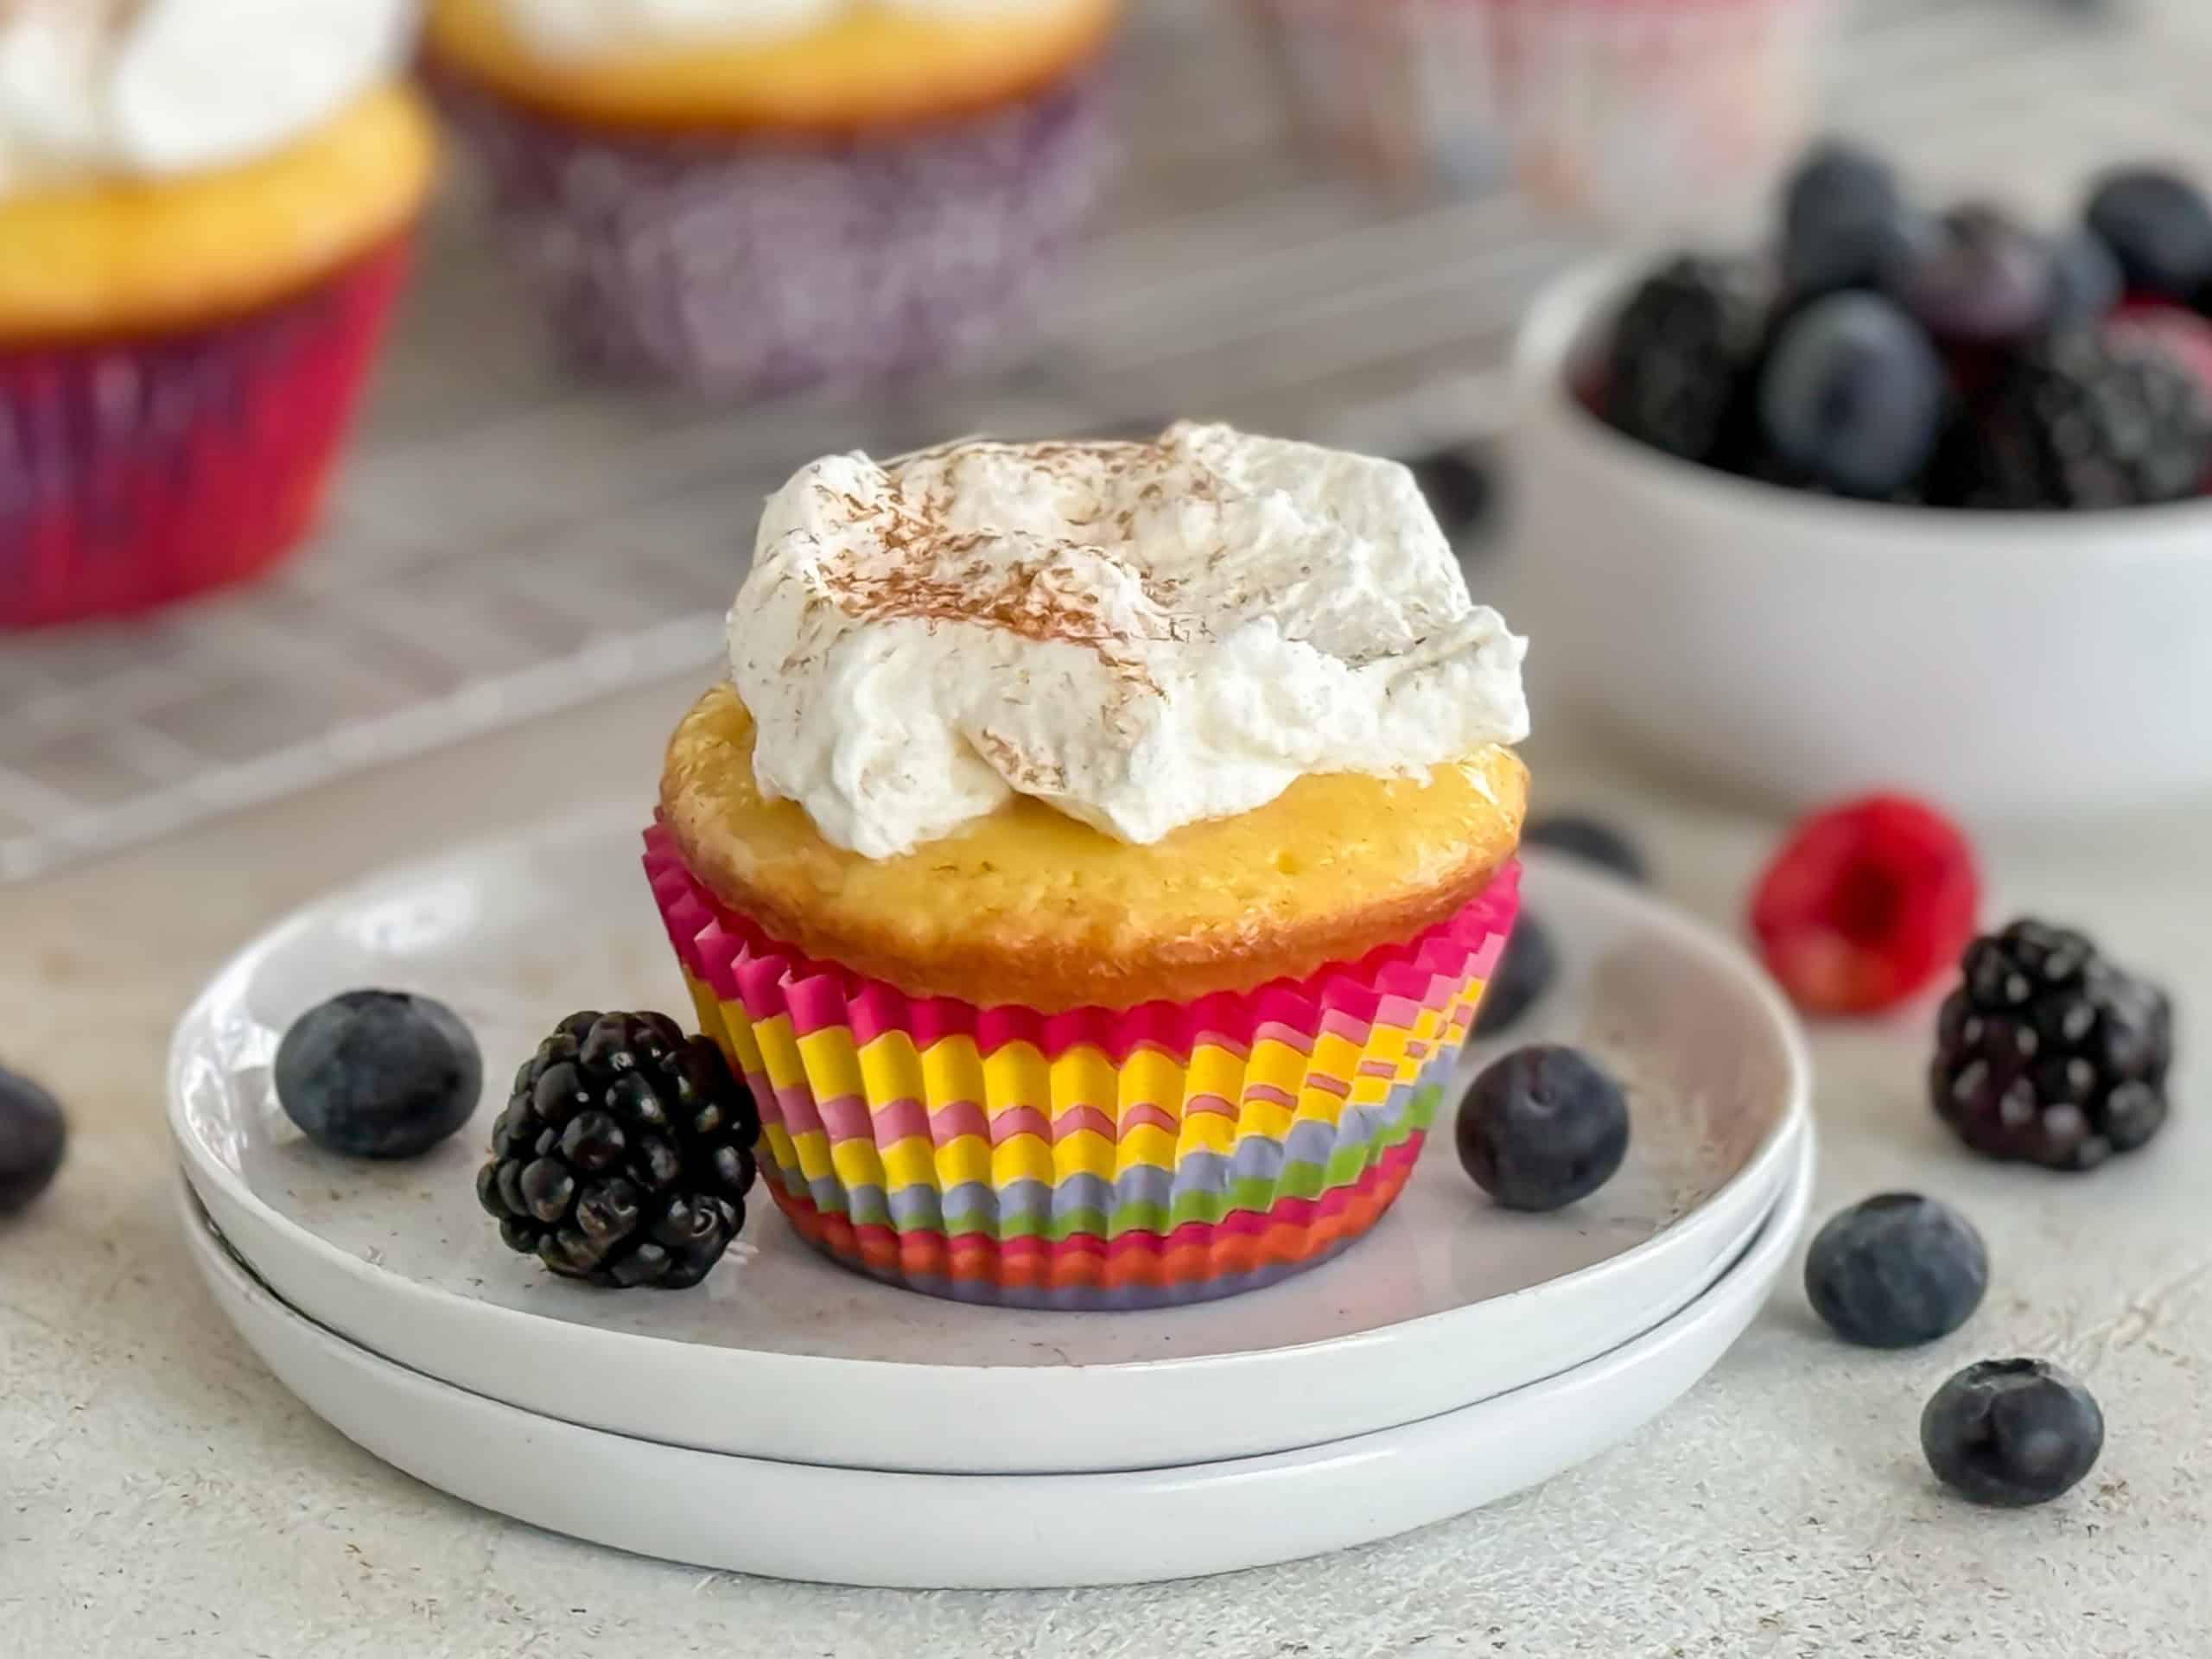 A close-up of a cupcake topped with whipped cream and a dusting of cinnamon, surrounded by fresh blackberries and blueberries on a white plate.